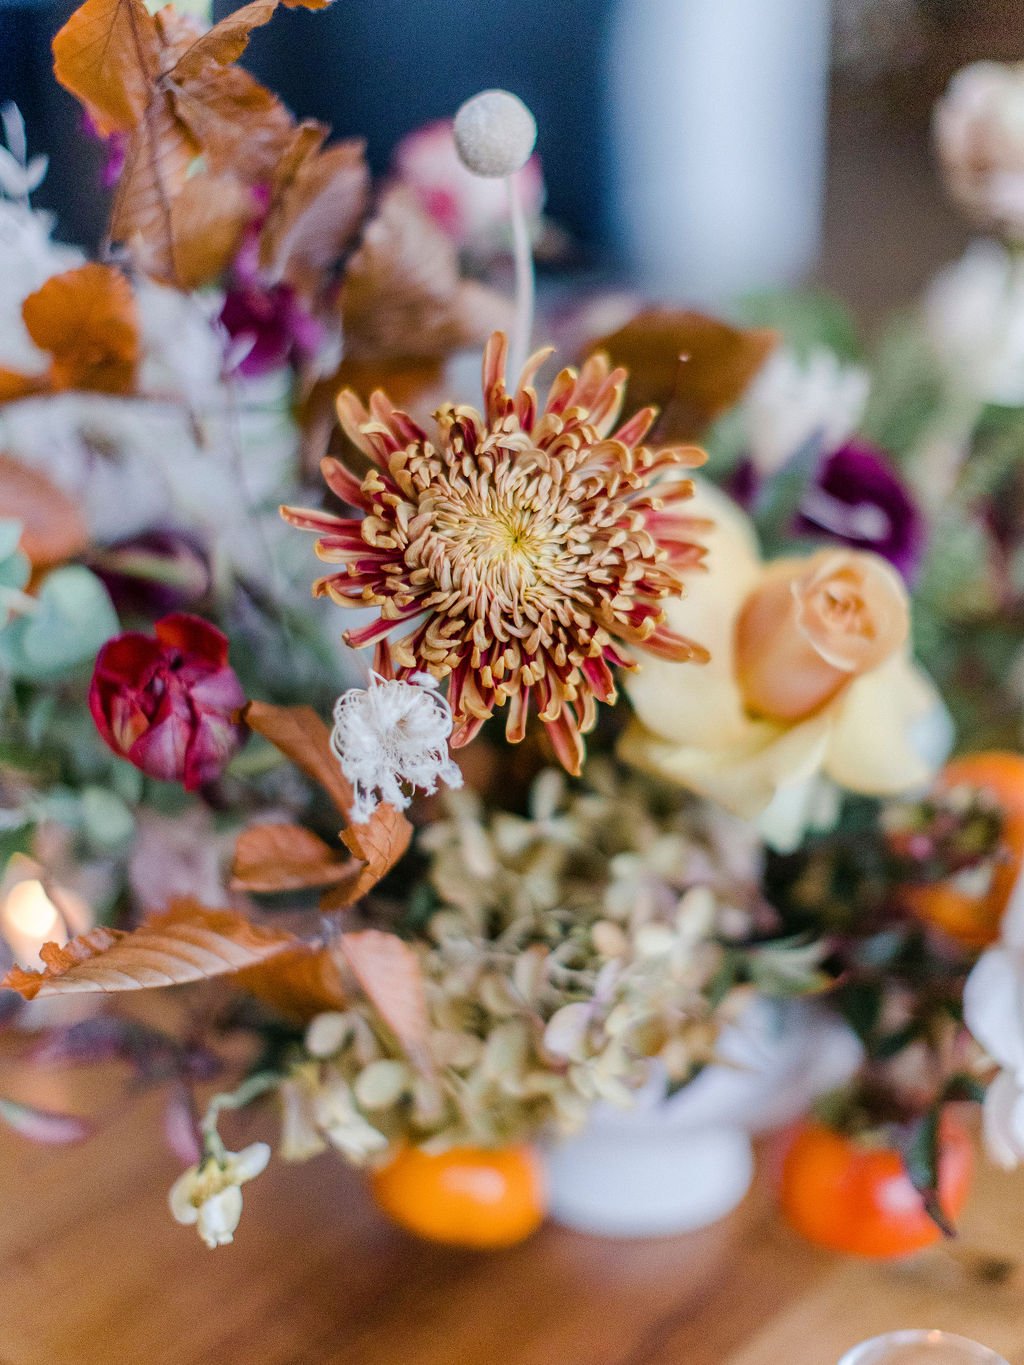 Eye-catching floral centerpieces comprised of tangerine, dusty rose, terra cotta, and deep red florals. Featuring garden roses, dried foliage, and fruity persimmons branches. Floral design by Rosemary and Finch in Nashville, TN.